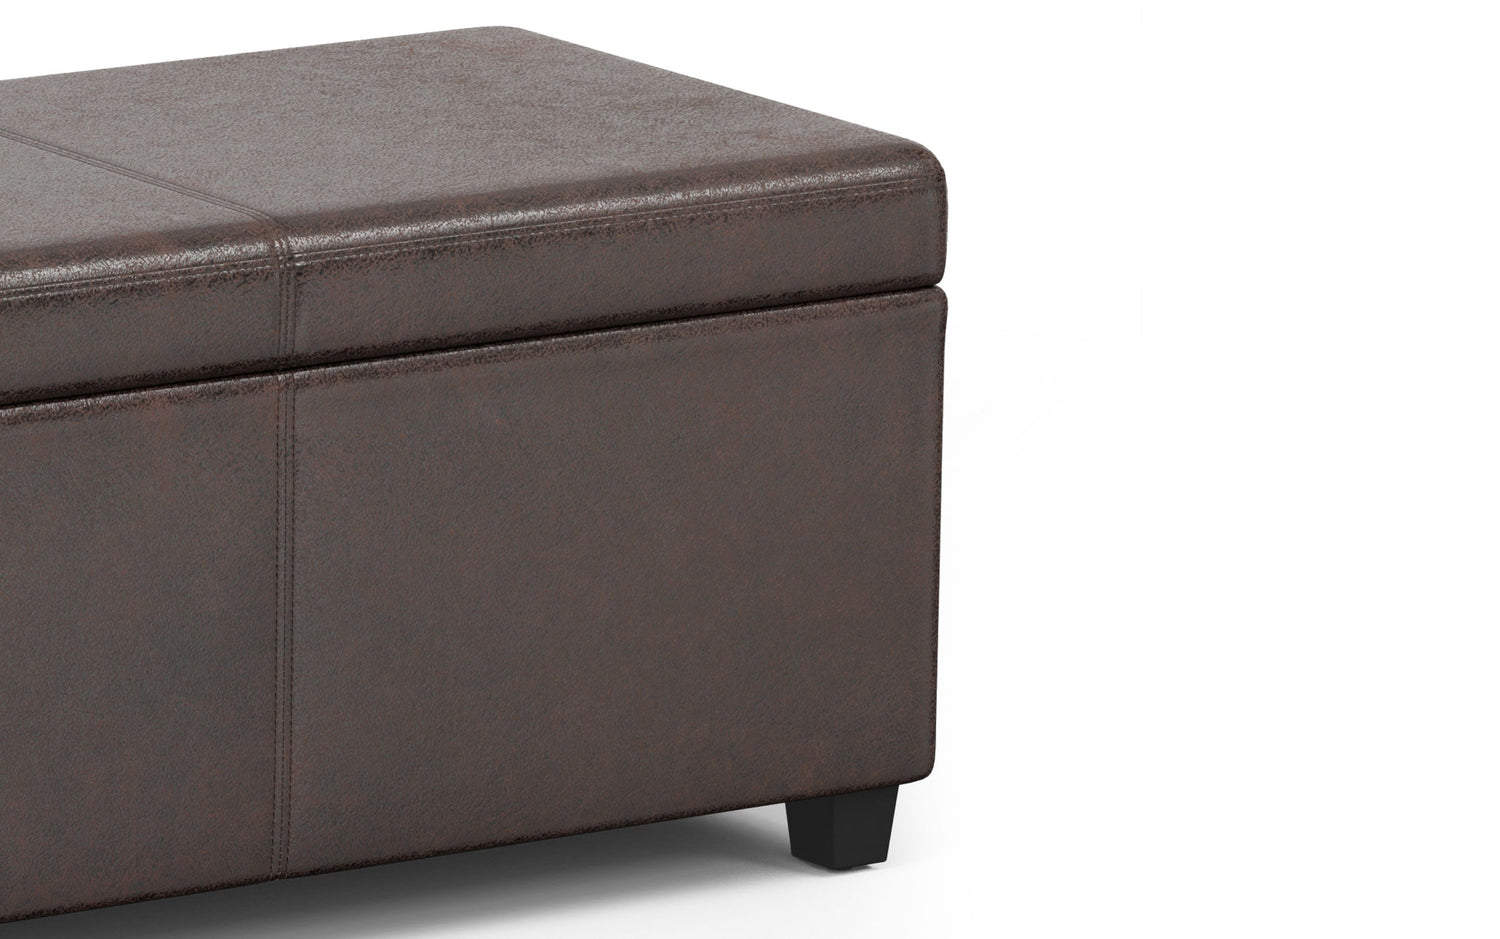 Distressed Brown Distressed Vegan Leather | Avalon Extra Large Storage Ottoman in Distressed Vegan Leather